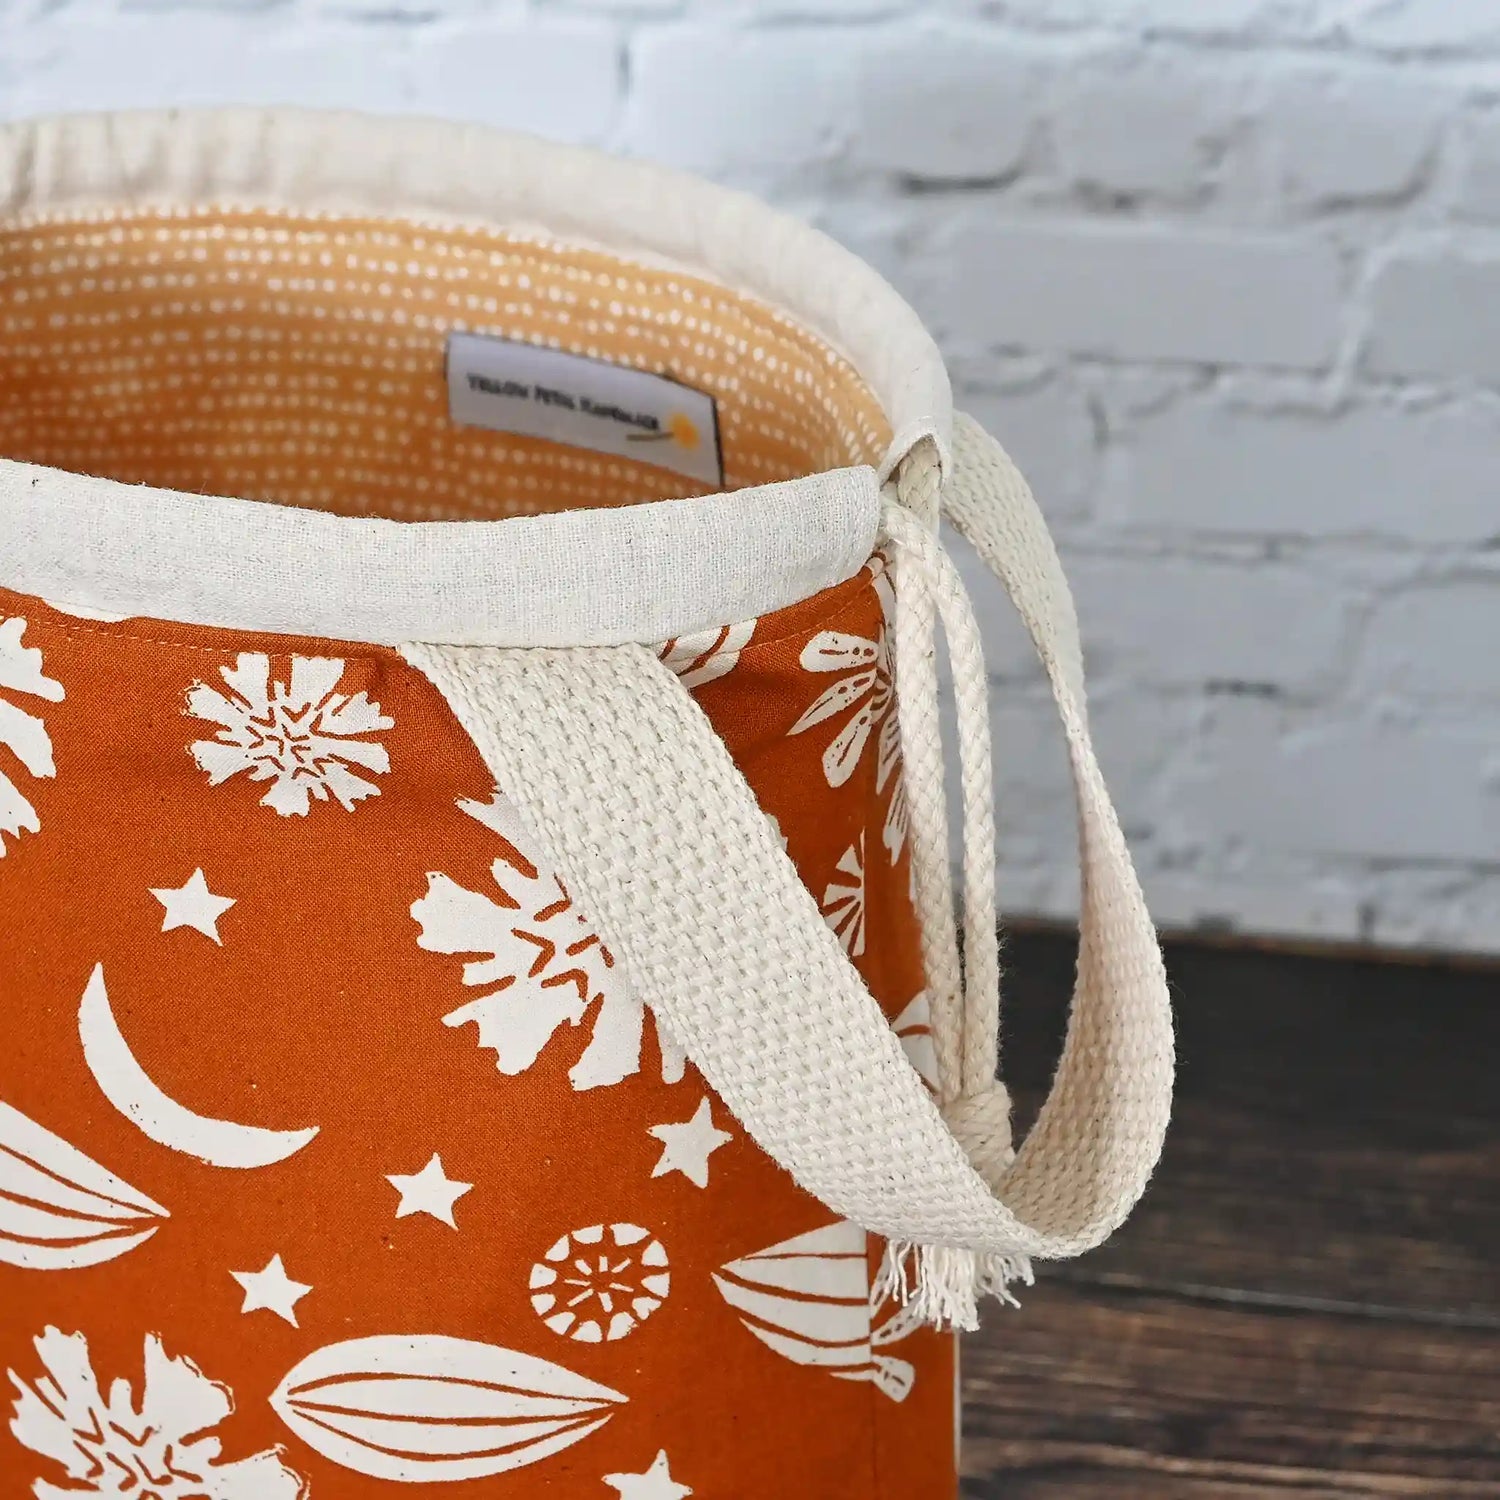 Beautiful drawstring project bag with handle in a burnt orange floral and star fabric and lined in a fun gold dotty cotton.  Handmade in Nova Scotia Canada by Yellow Petal Handmade.